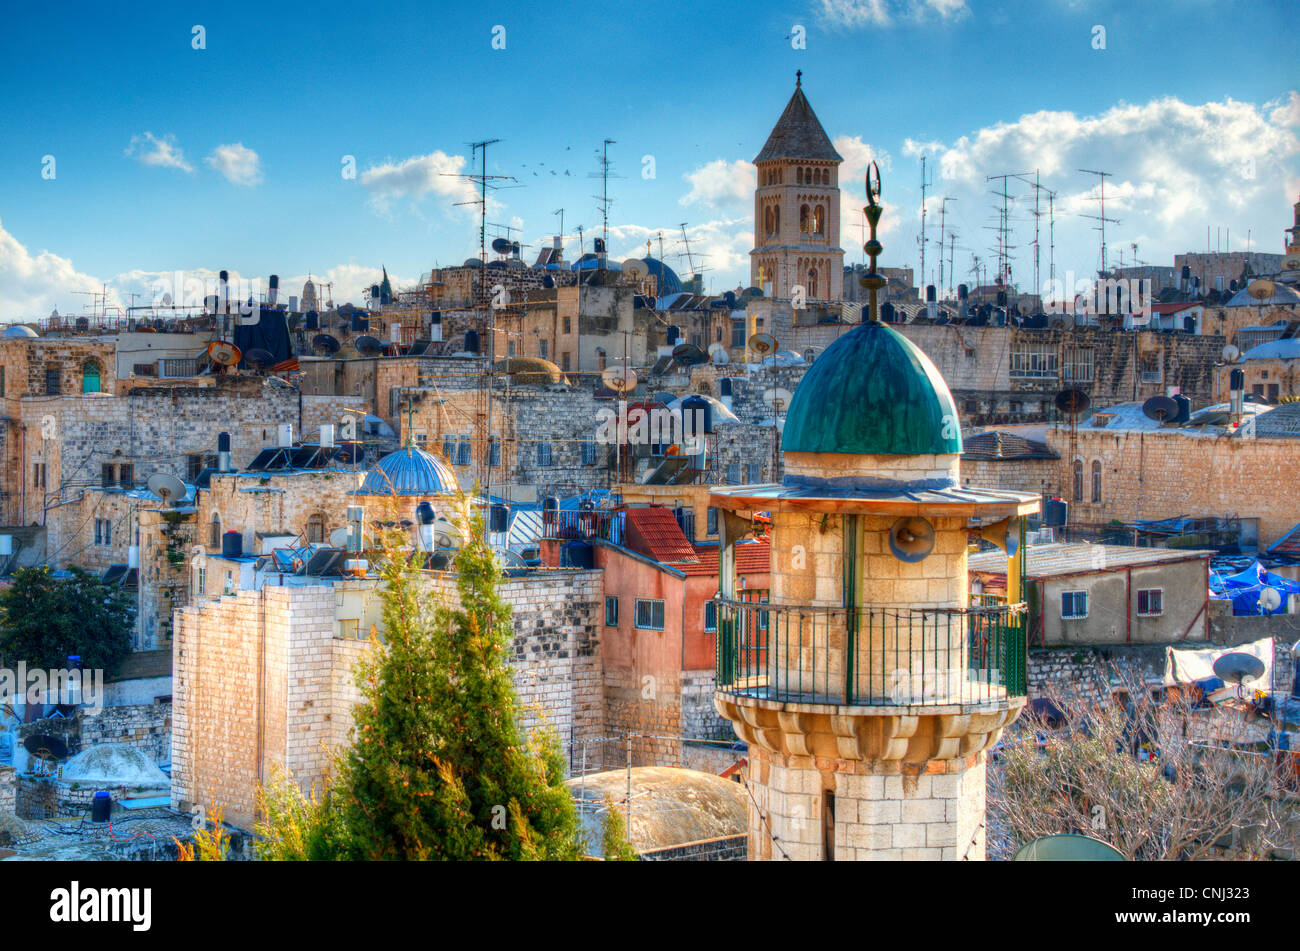 View of minarets and towers along the skyline of the Old City of Jerusalem, Israel. Stock Photo